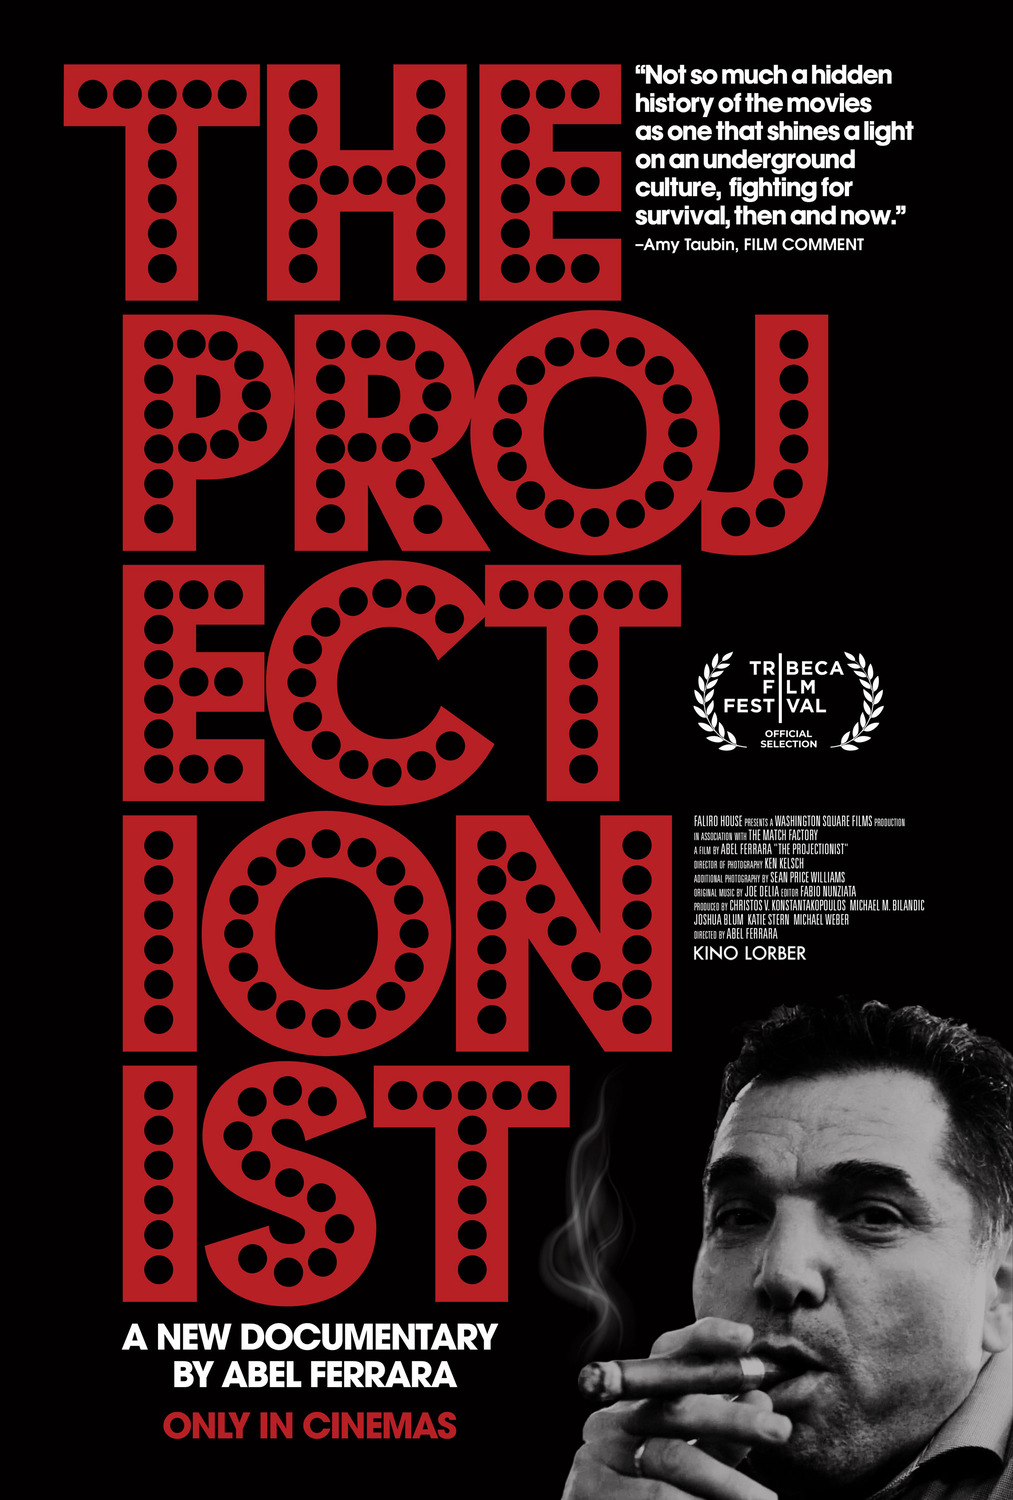 The Projectionist (2019) Screenshot 1